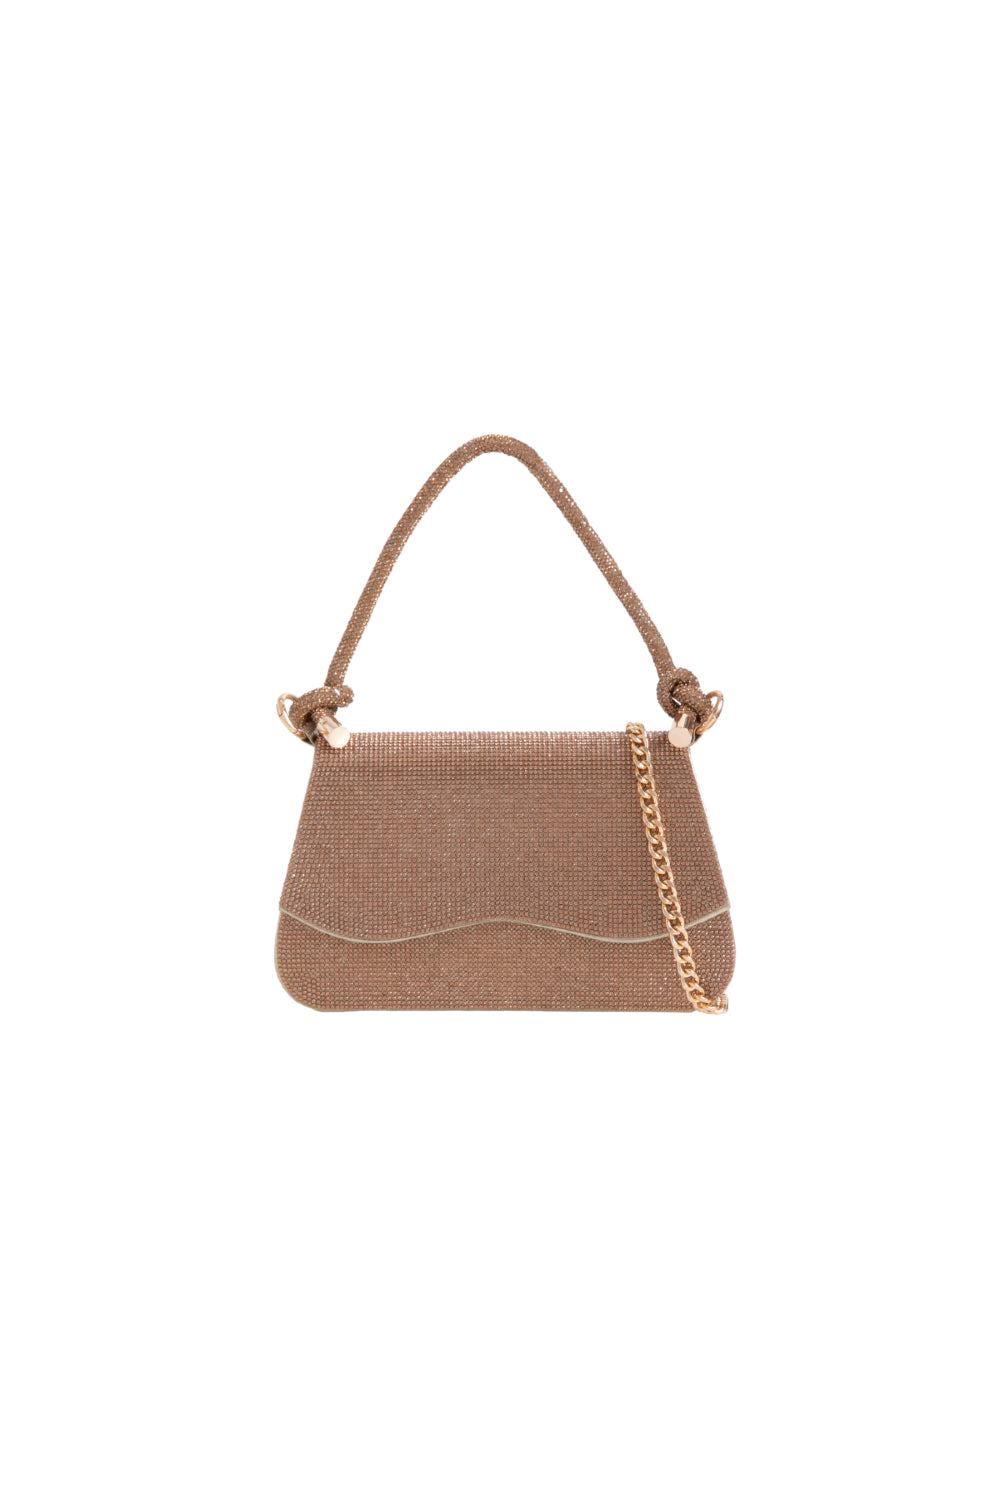 Gold Diamante Top Handle Bag With Knot Details